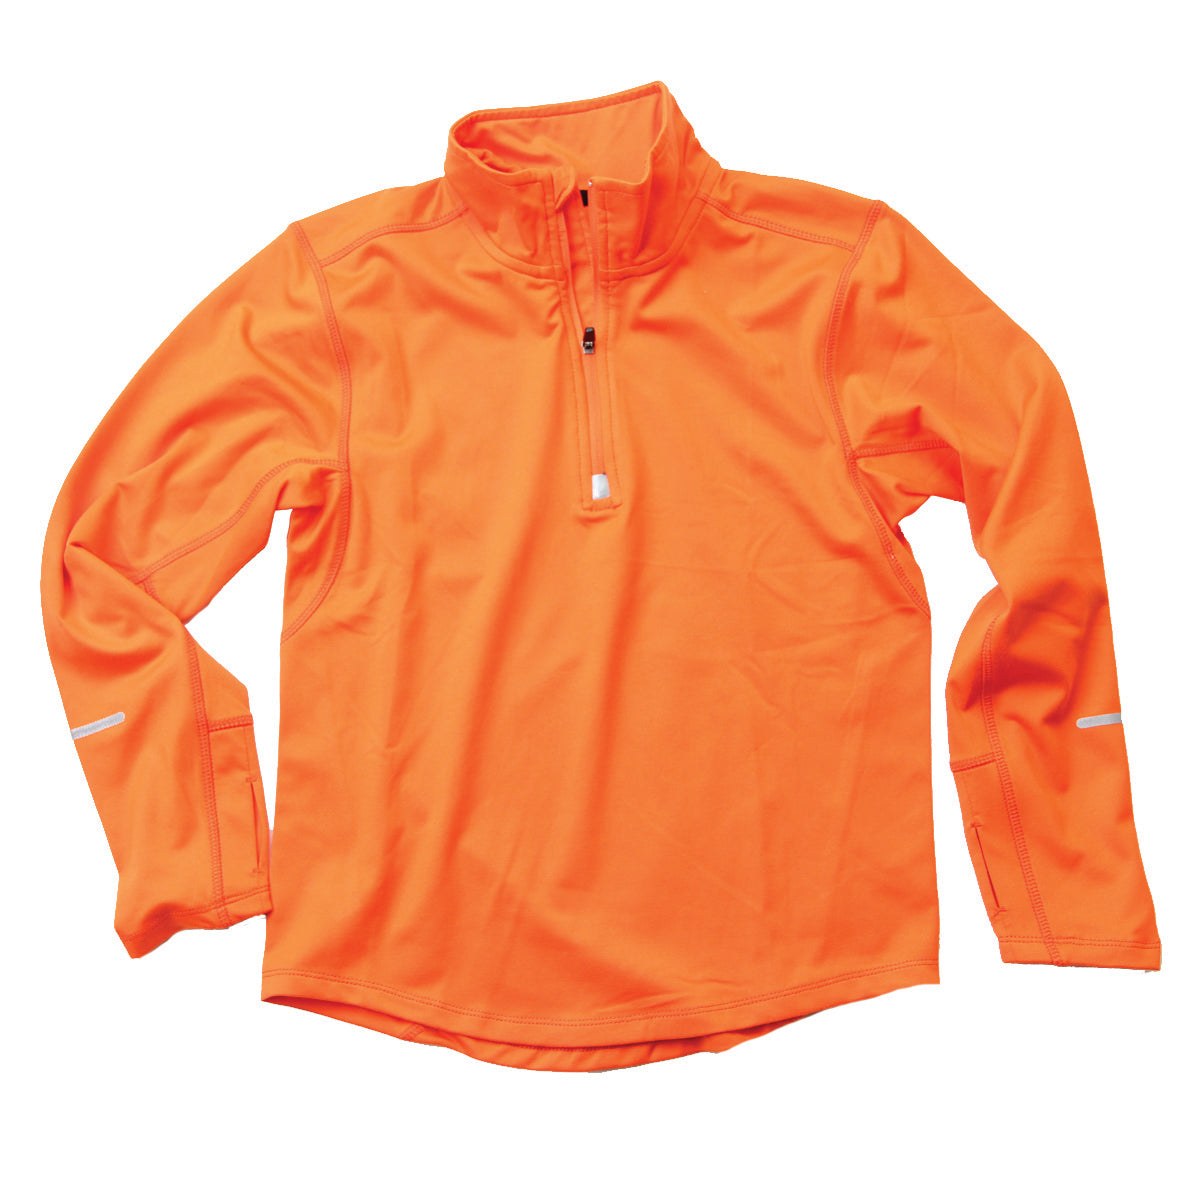 Youth Orange Performance Pullover